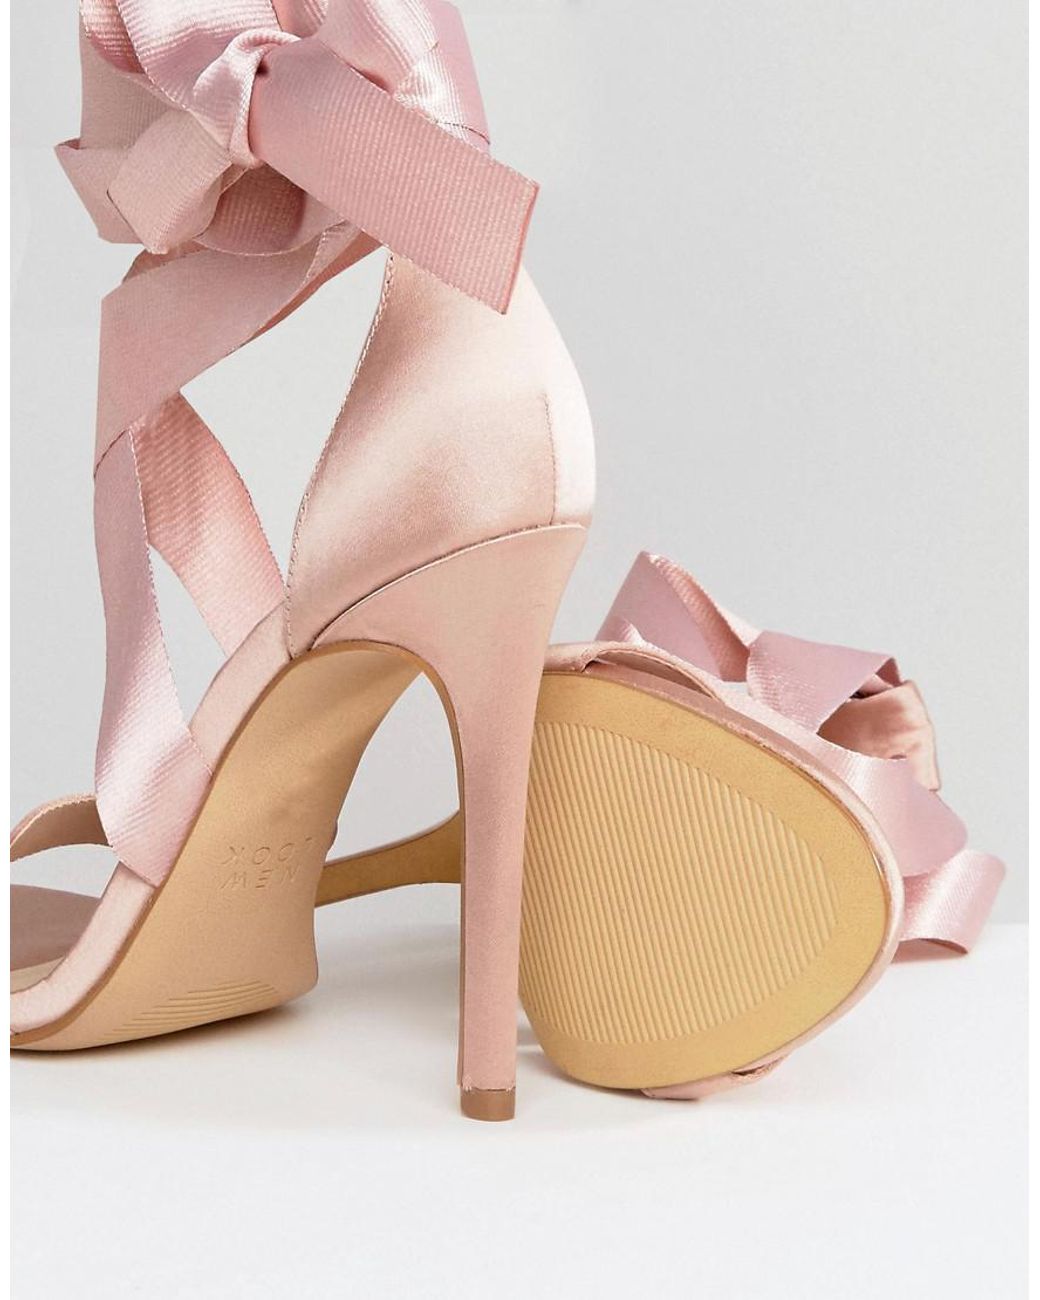 Soft Blush Satin Block Heel Sandal with Front Oversized Tulle Bow | Flower  girl shoes, Wedding shoes heels, Pink block heels